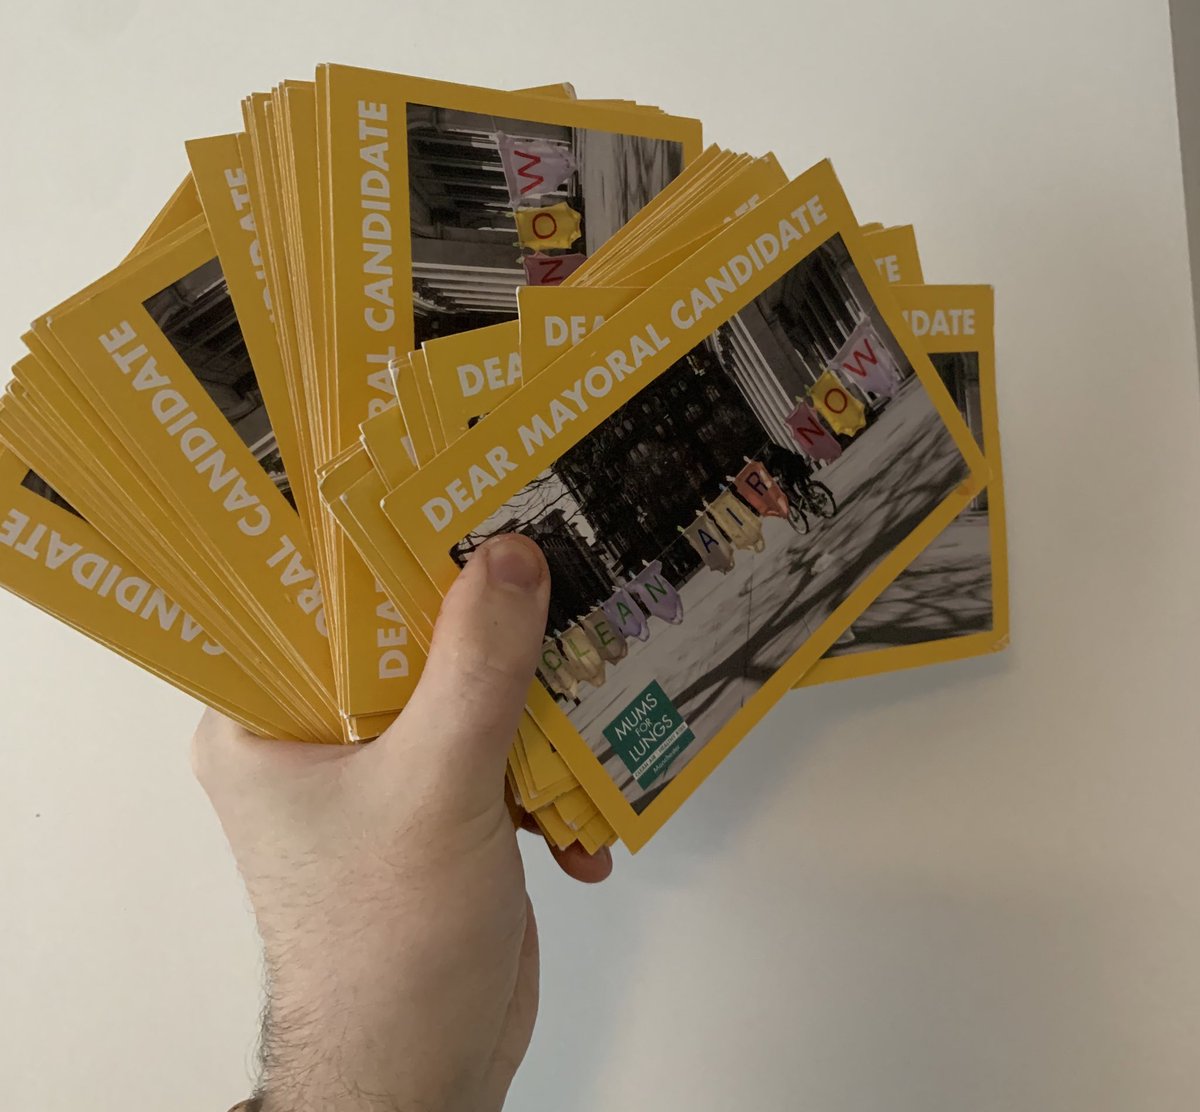 I’m not exaggerating when I say I’ve received HUNDREDS of postcards through my letterbox from @MumsForLungs since announcing my run for GM Mayor. Well done to their team on an incredible campaign, which has informed us all, and has made EVERY candidate commit to action.